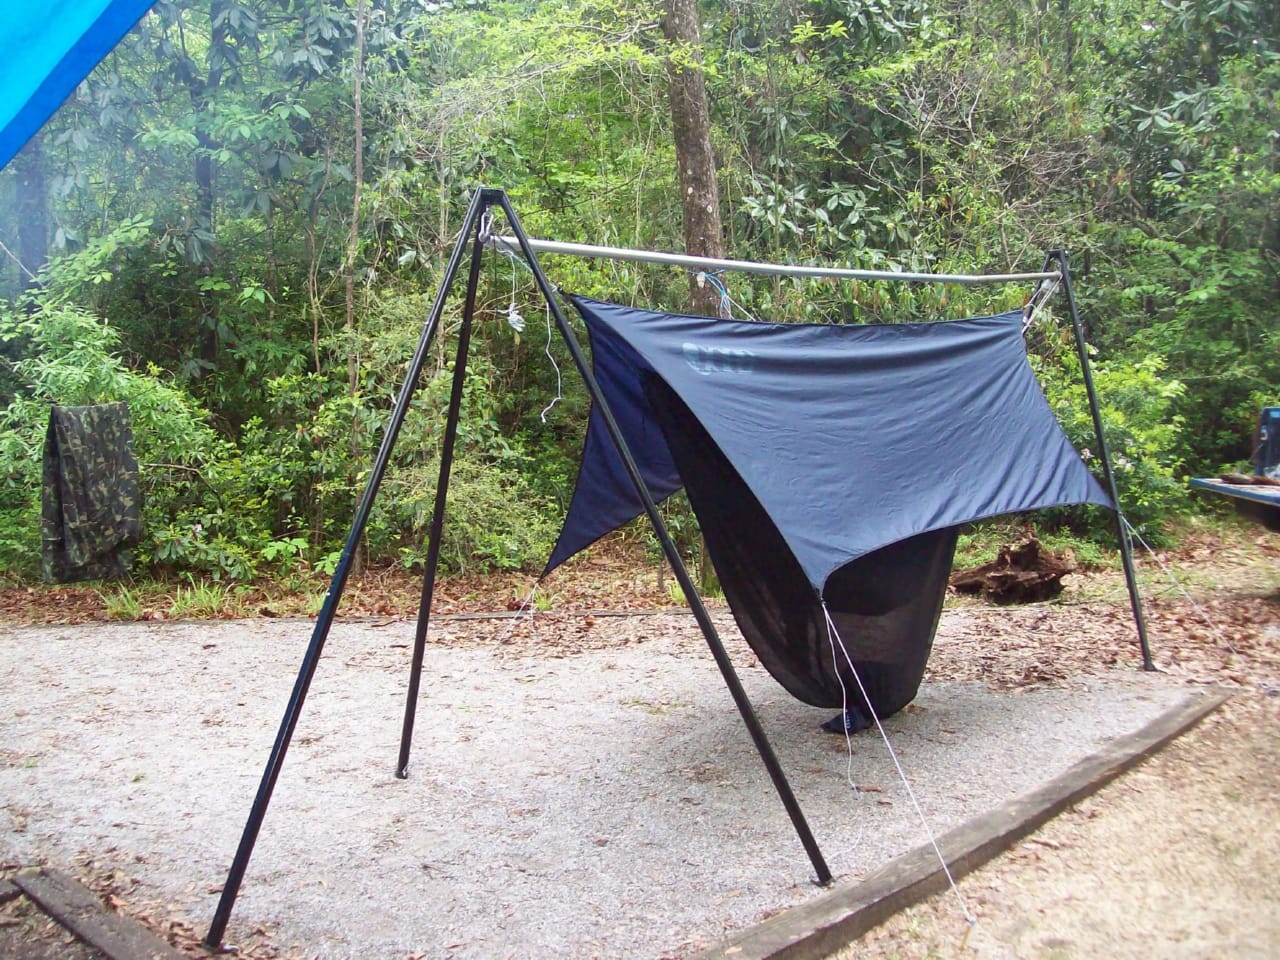 How to hang a hammock without trees